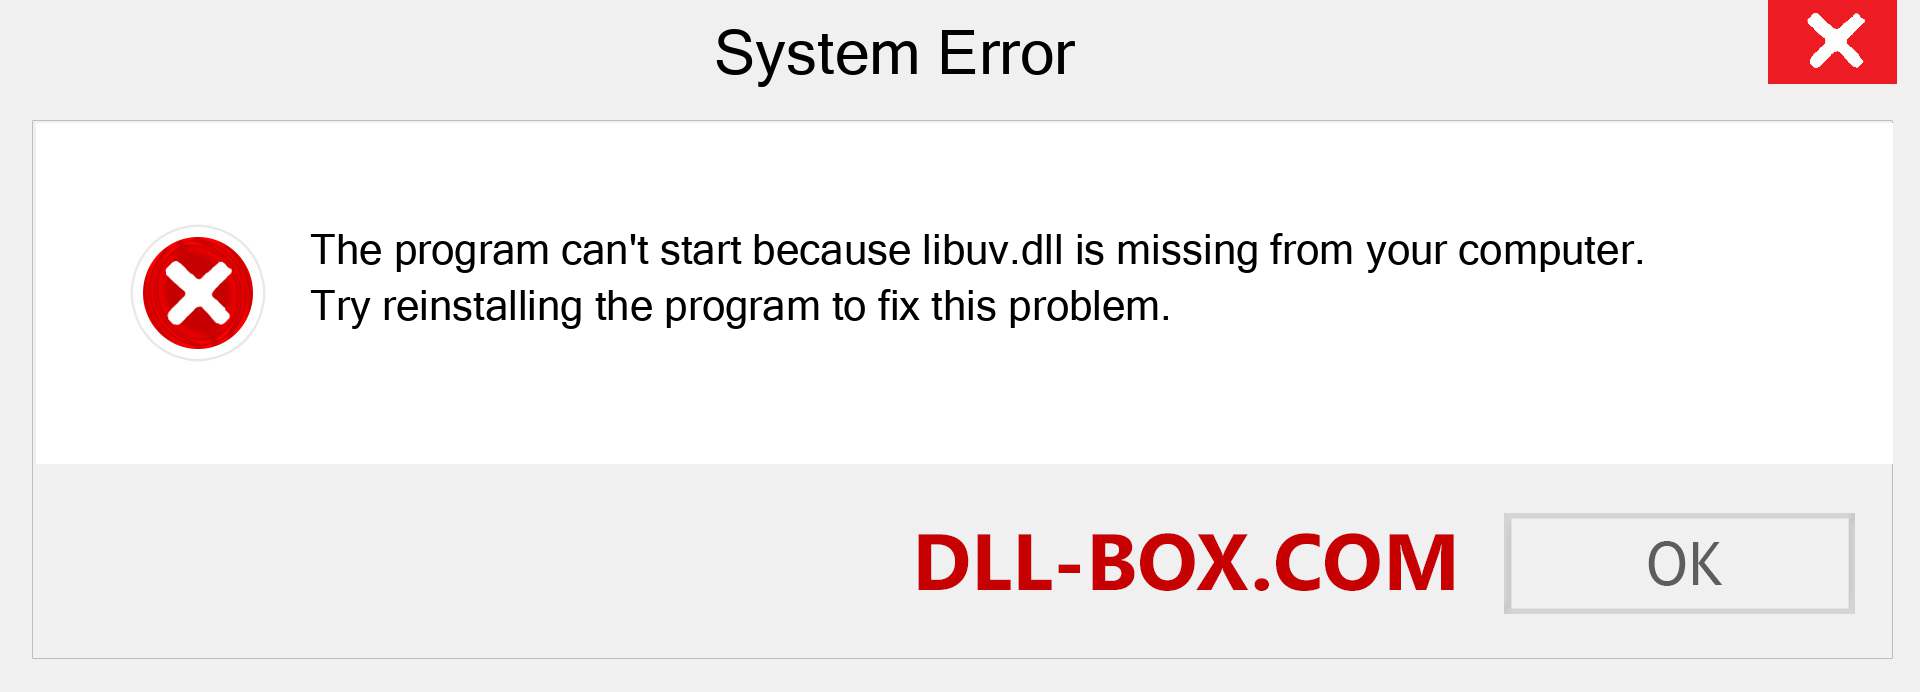  libuv.dll file is missing?. Download for Windows 7, 8, 10 - Fix  libuv dll Missing Error on Windows, photos, images